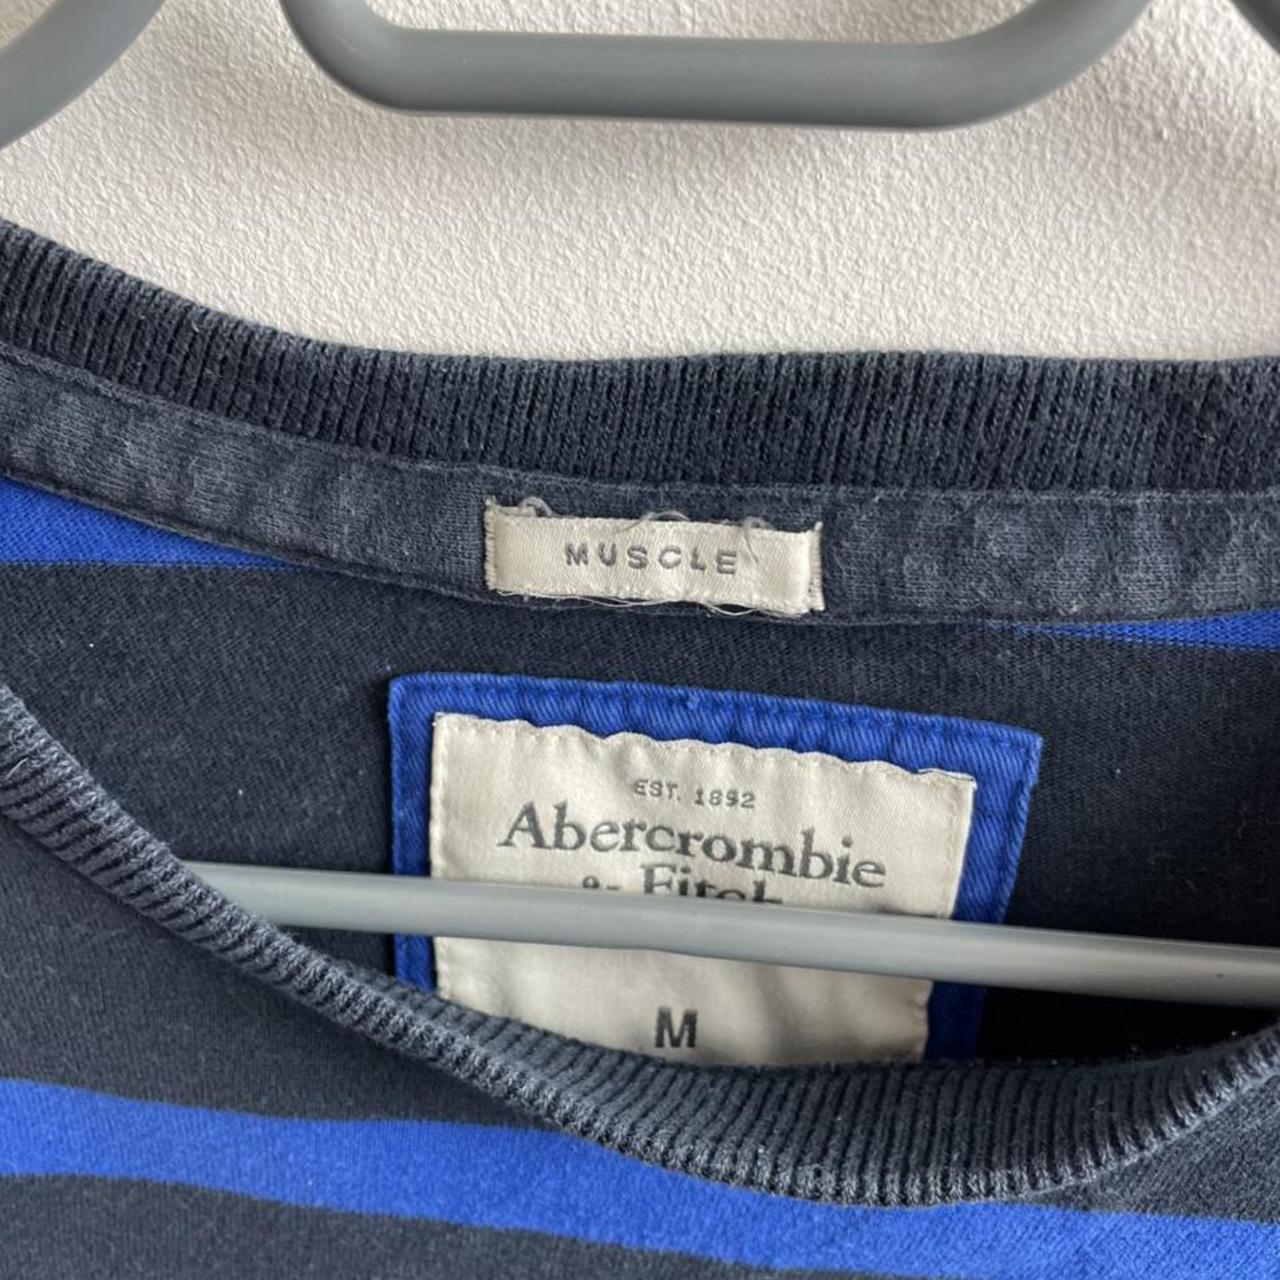 Abercrombie and Fitch - Depop